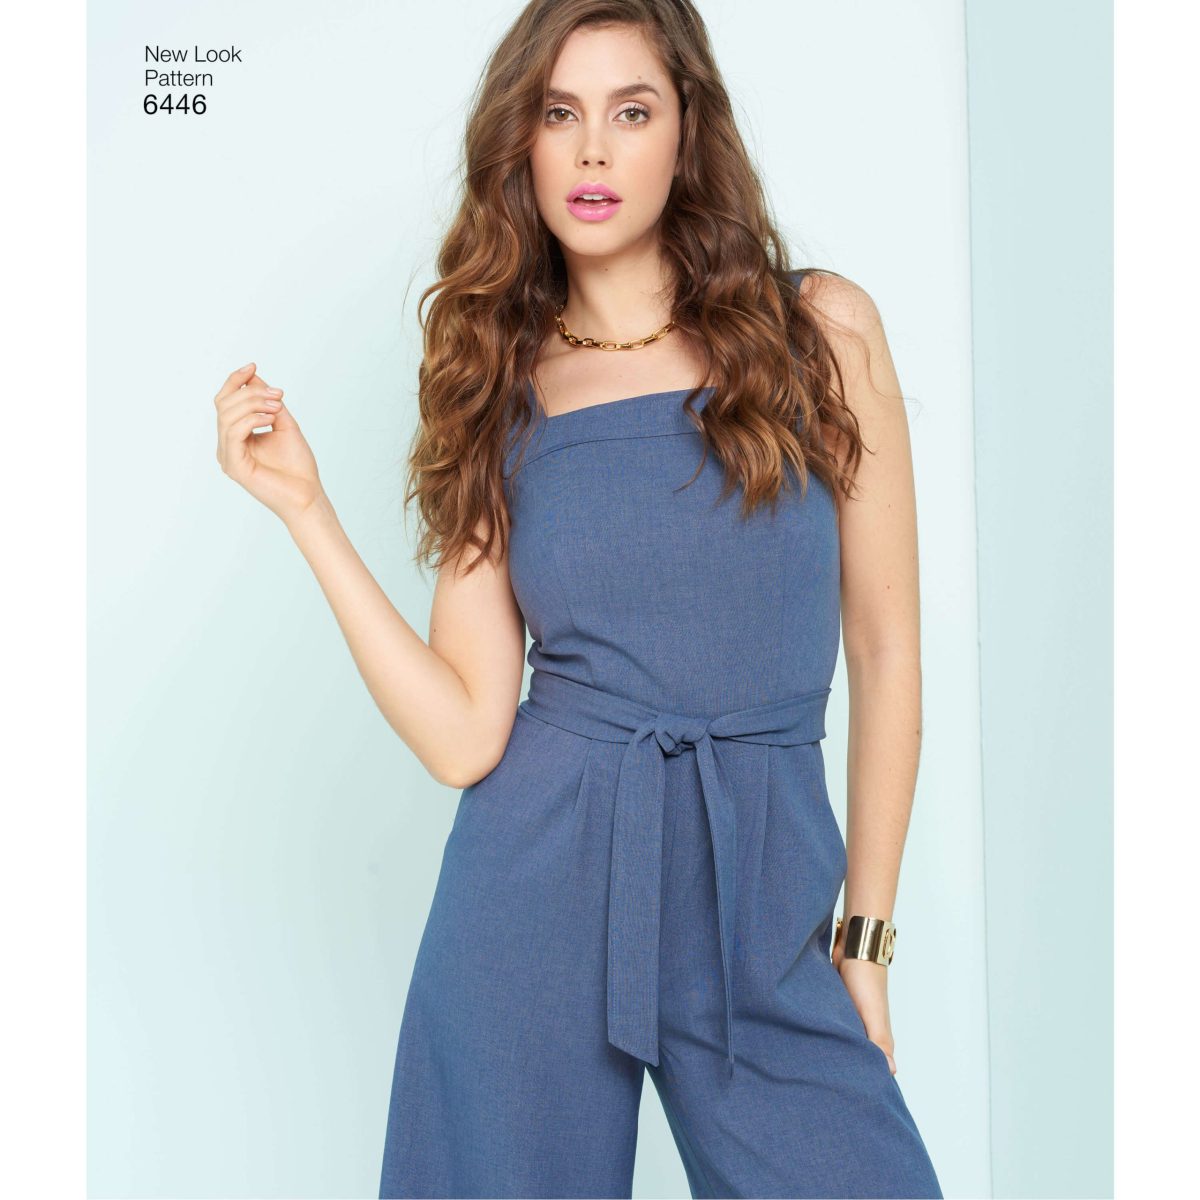 New Look Sewing Pattern N6446 Misses' Jumpsuits and Dresses